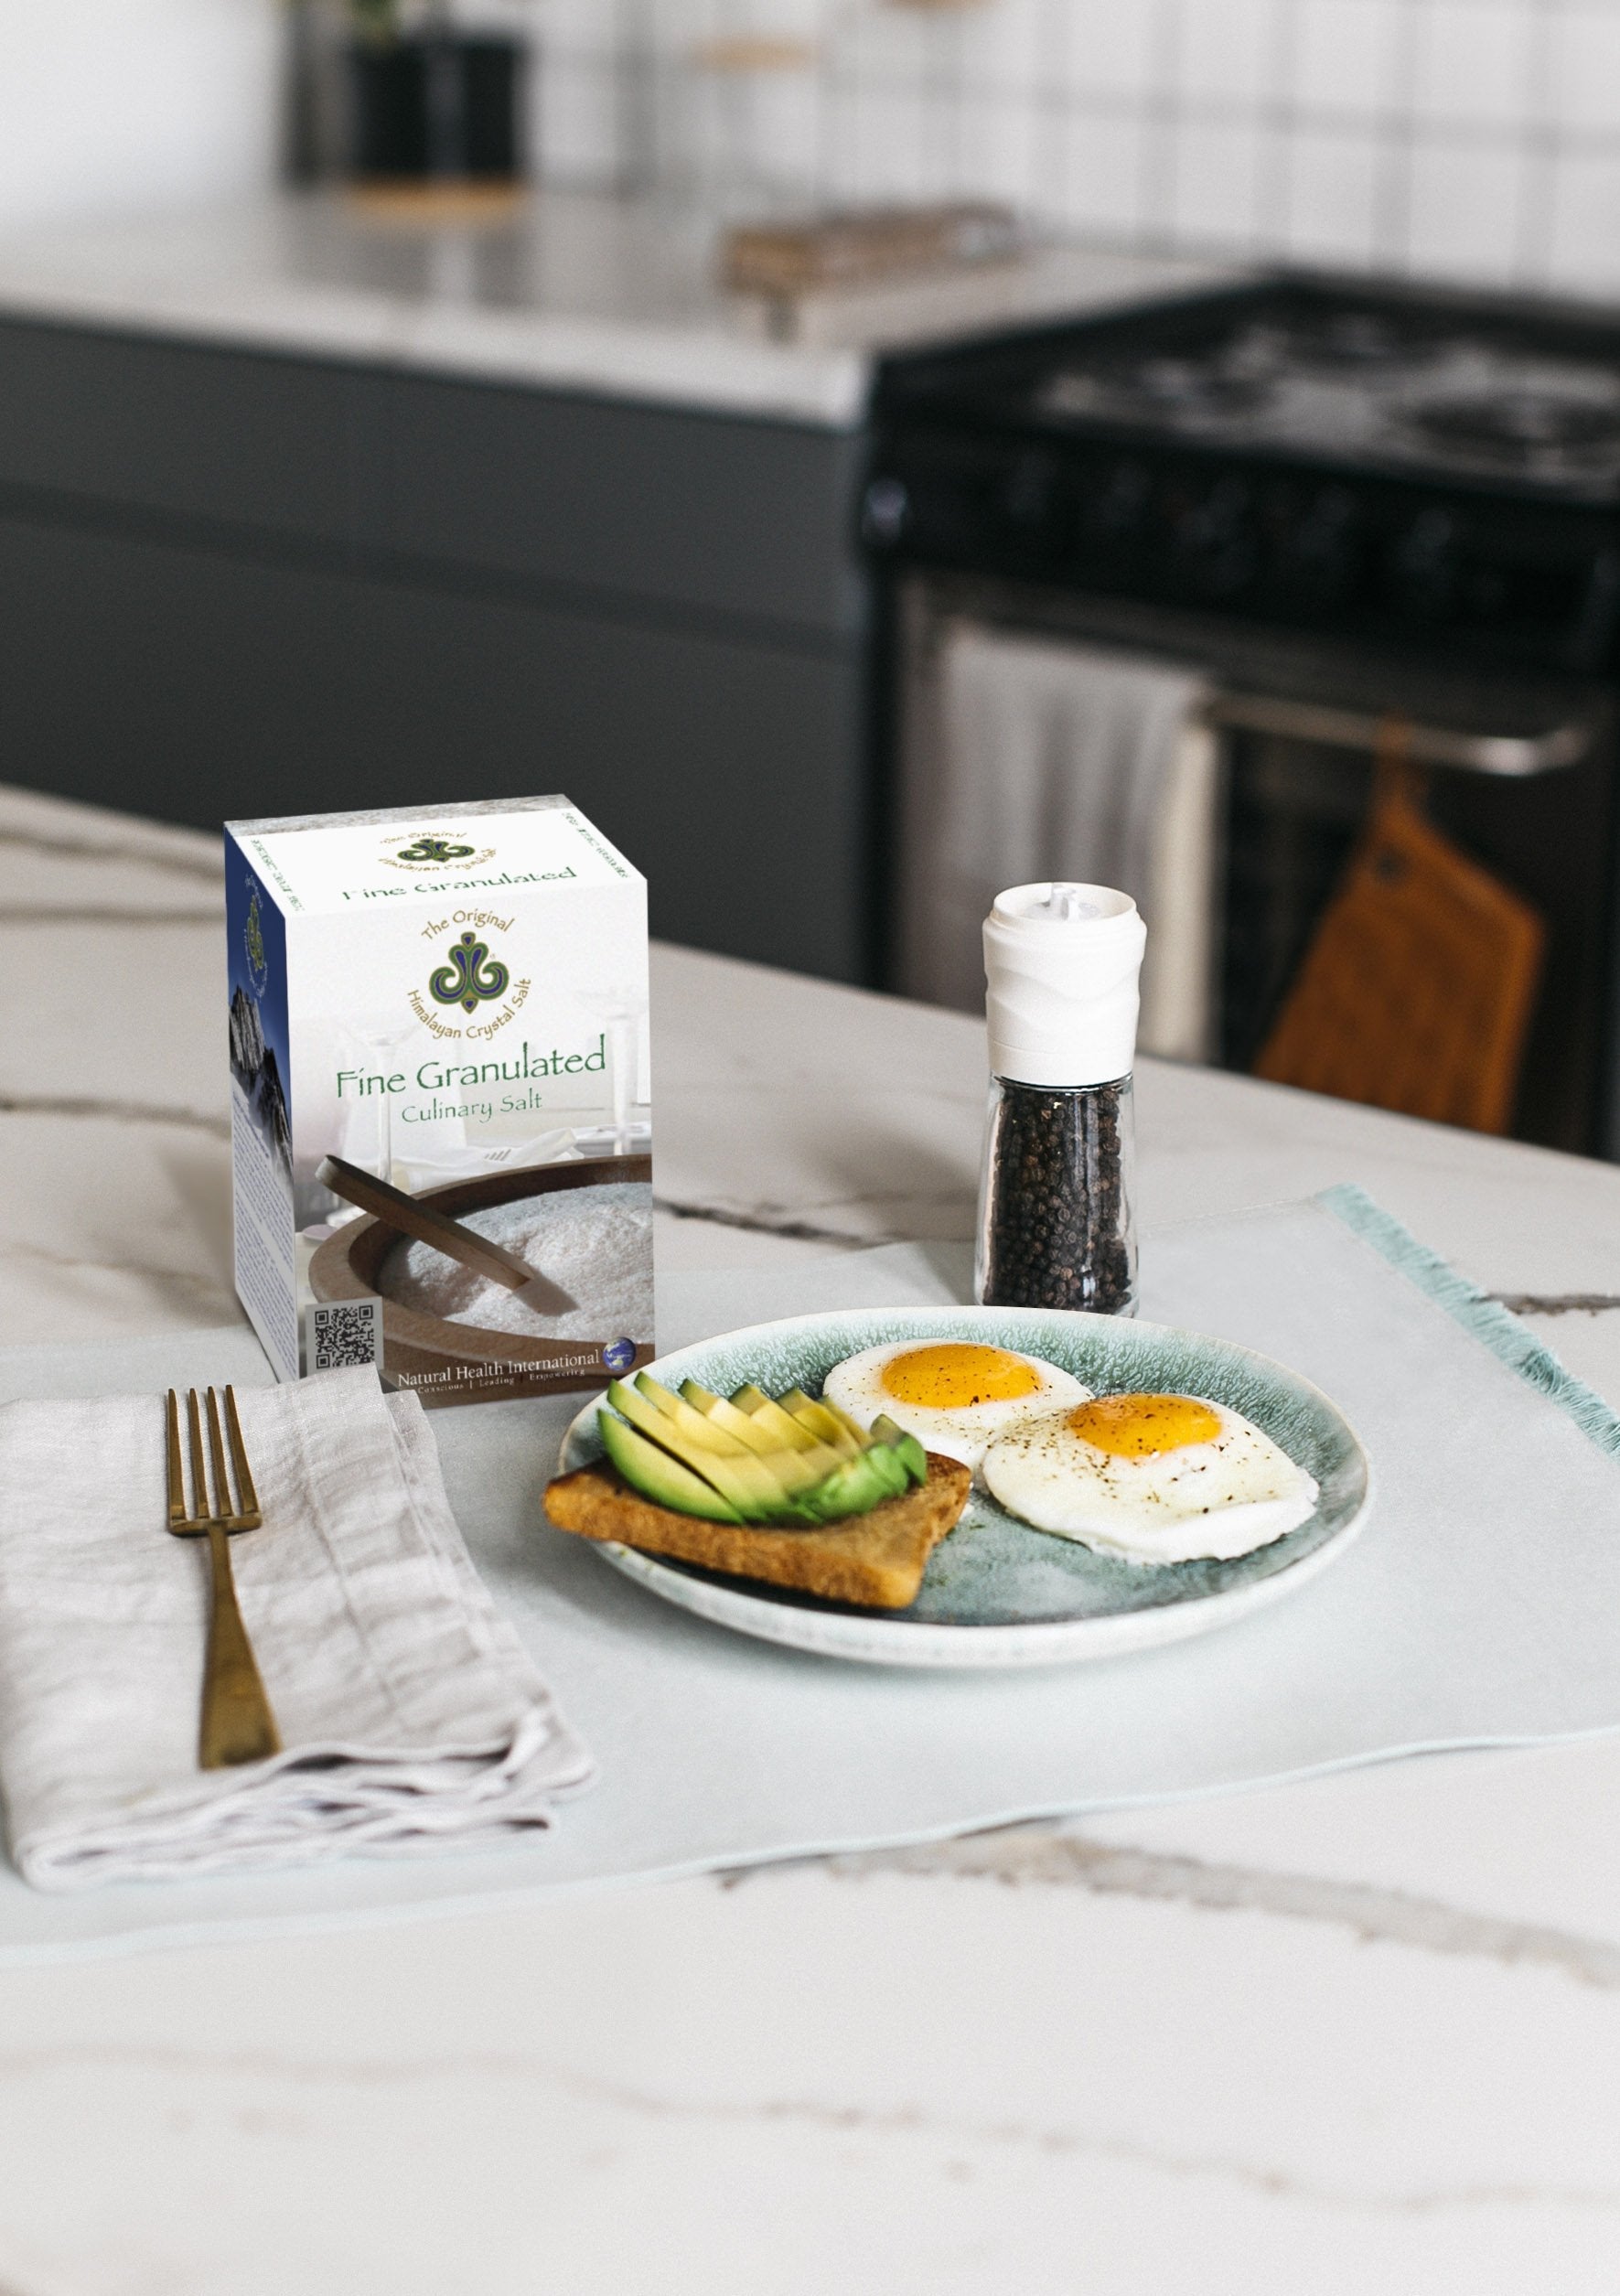 Fine Granulated Culinary Salt right-facing front of Finely Granulated Culinary Salt product box showing wooden bowl with salt and spoon, on white and black marble kitchen counter with grinder filled with black pepper, gold fork on white cloth napkin, and plate of avocado toast and sunny-side-up eggs